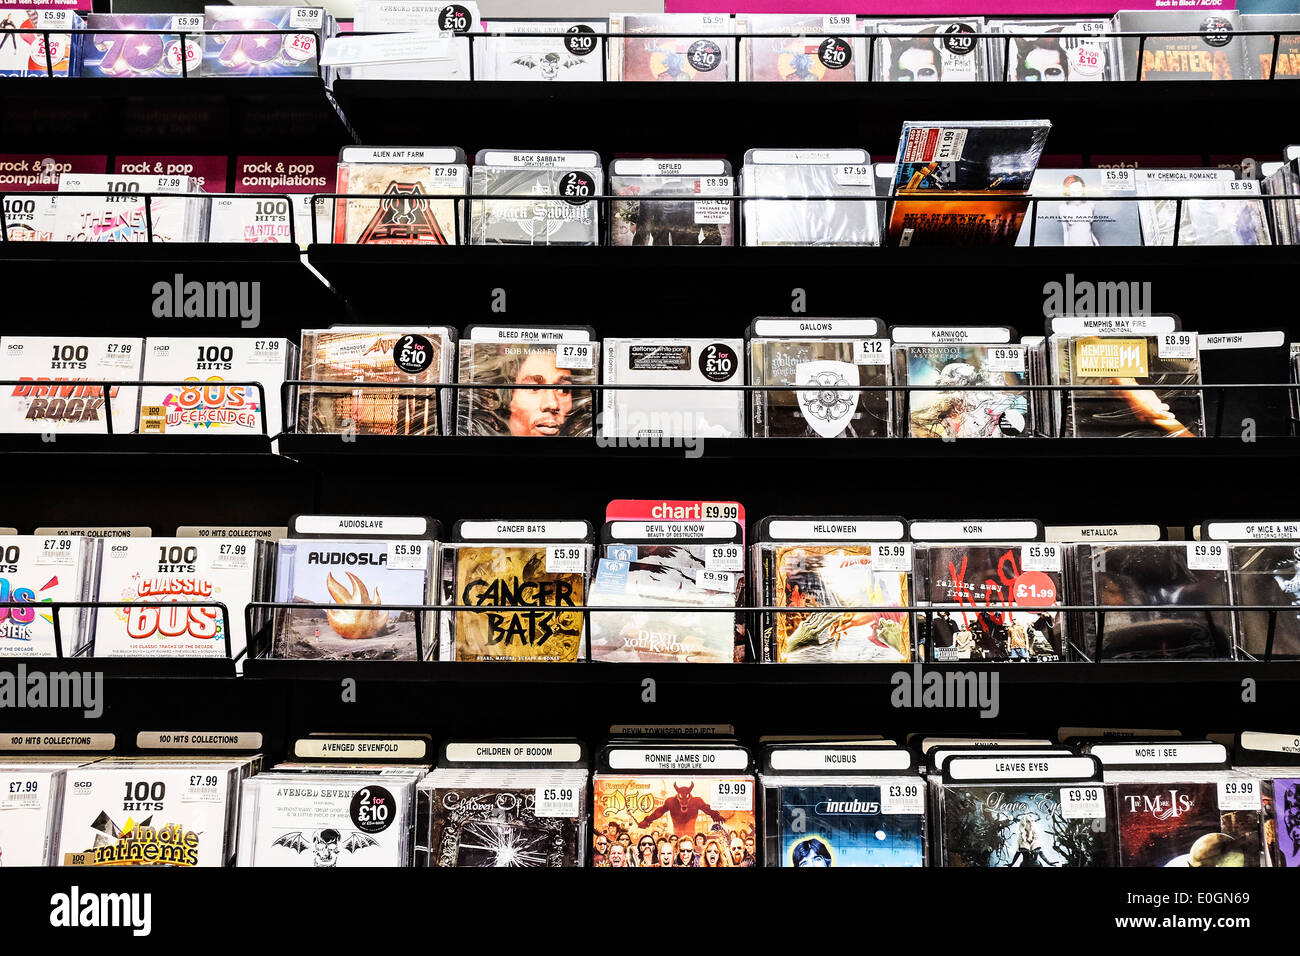 Music CDs on sale in a music shop store Stock Photo